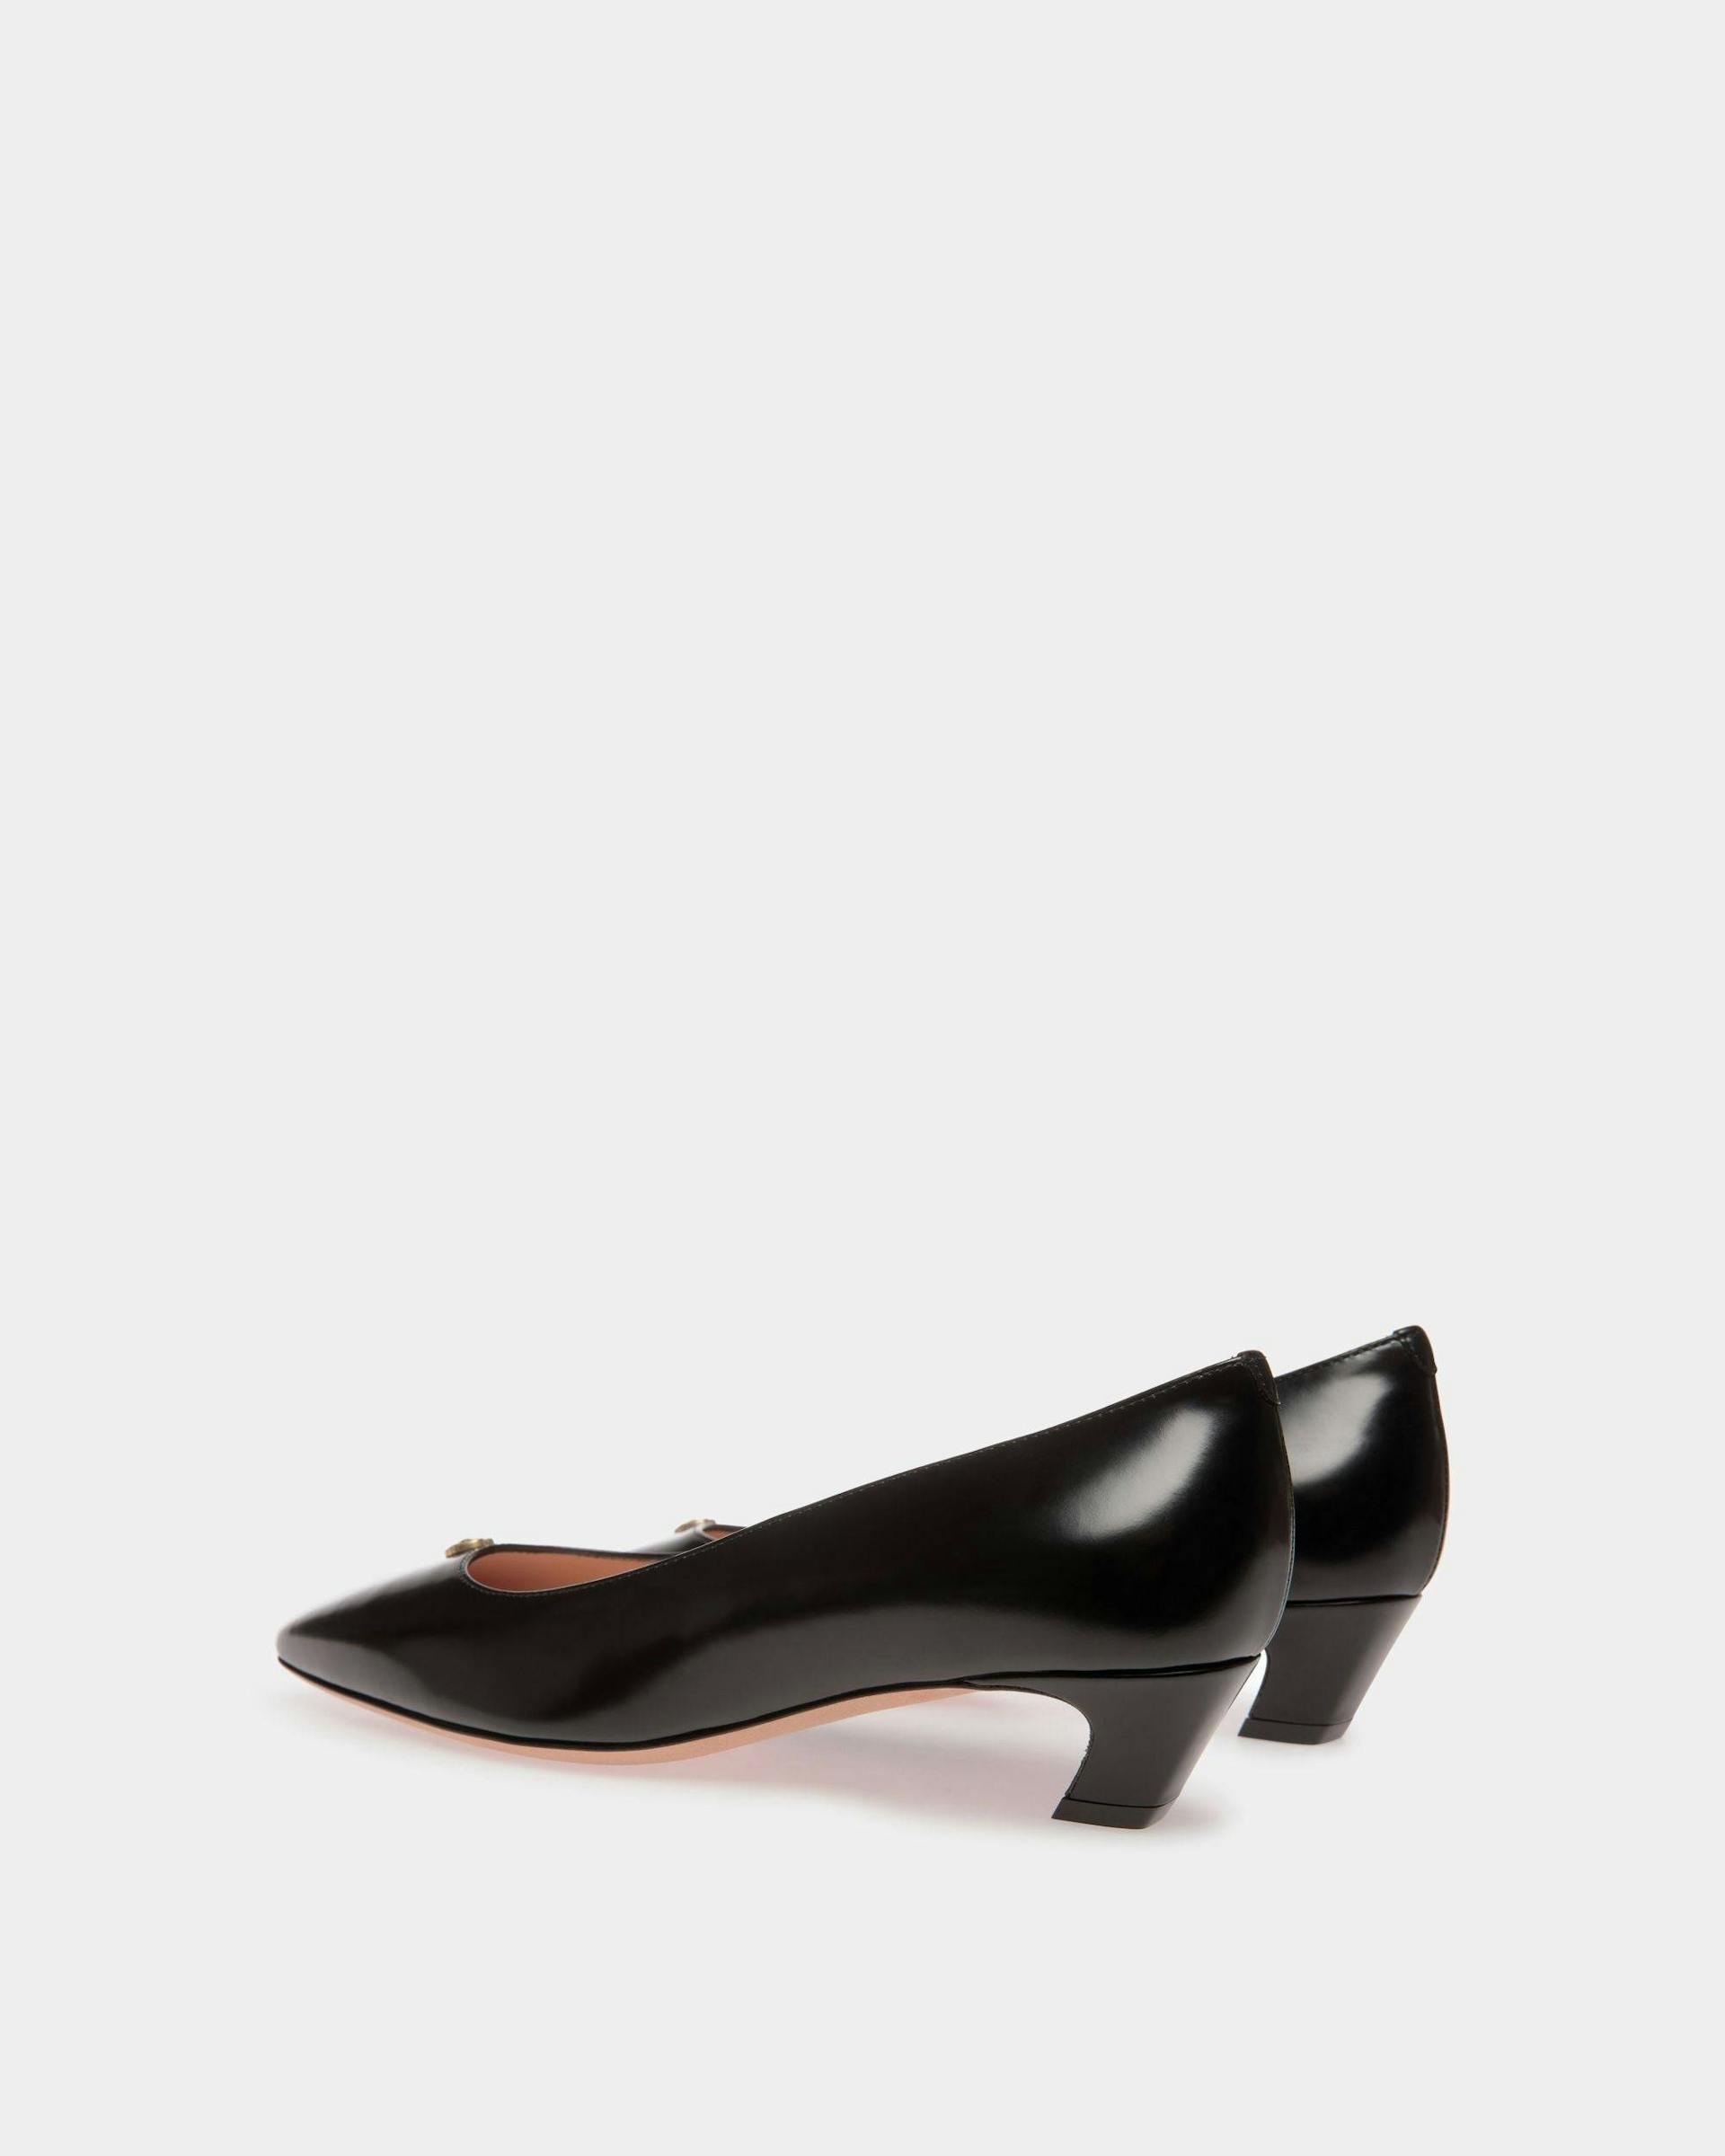 Women's Sylt Pump In Black Leather | Bally | Still Life 3/4 Back